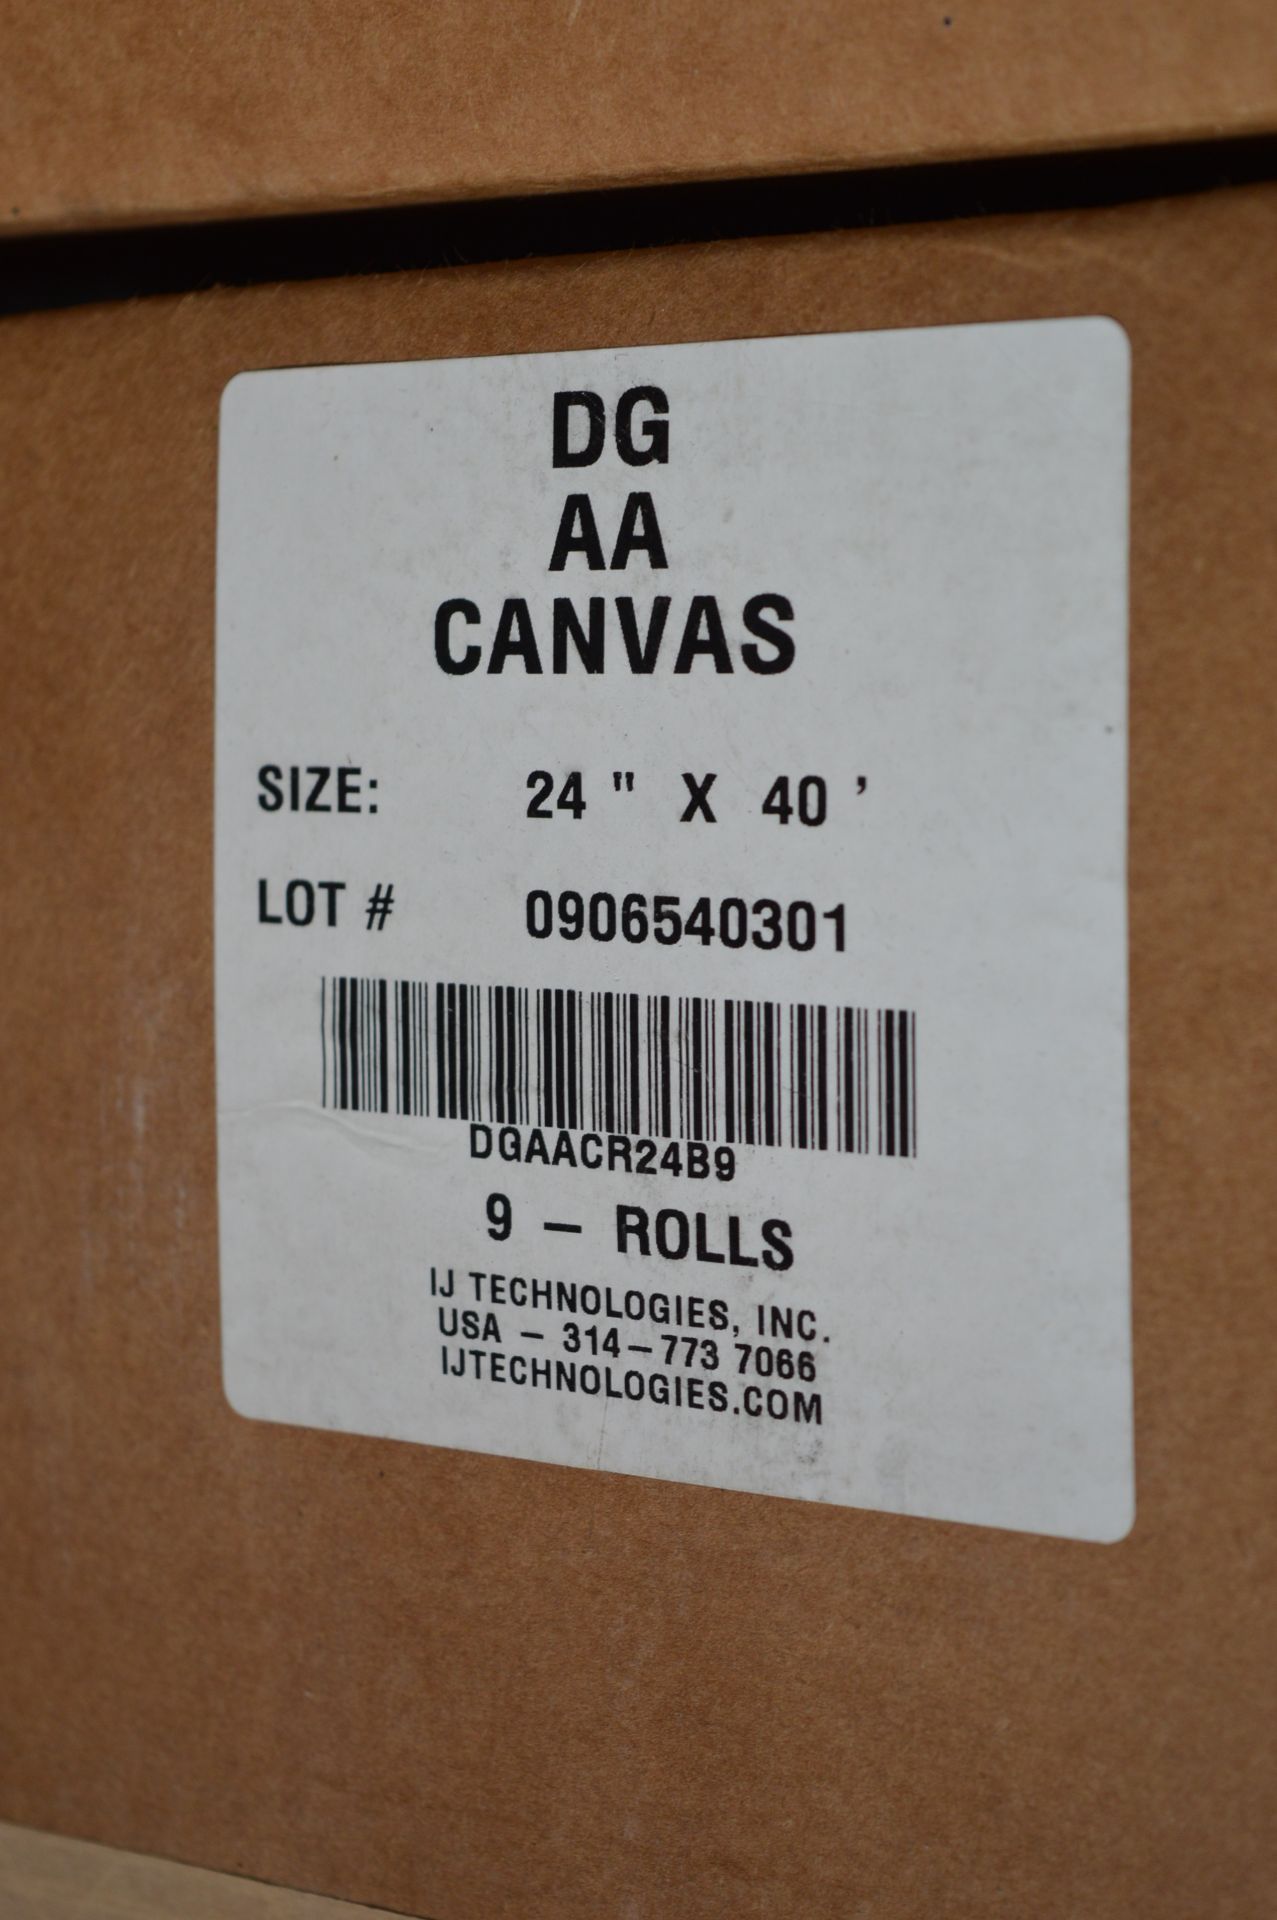 1 x Roll of IJTechnologies DuraGraphix Textured Canvas - Size 24" x 40' - Engineered to Provide - Image 2 of 2